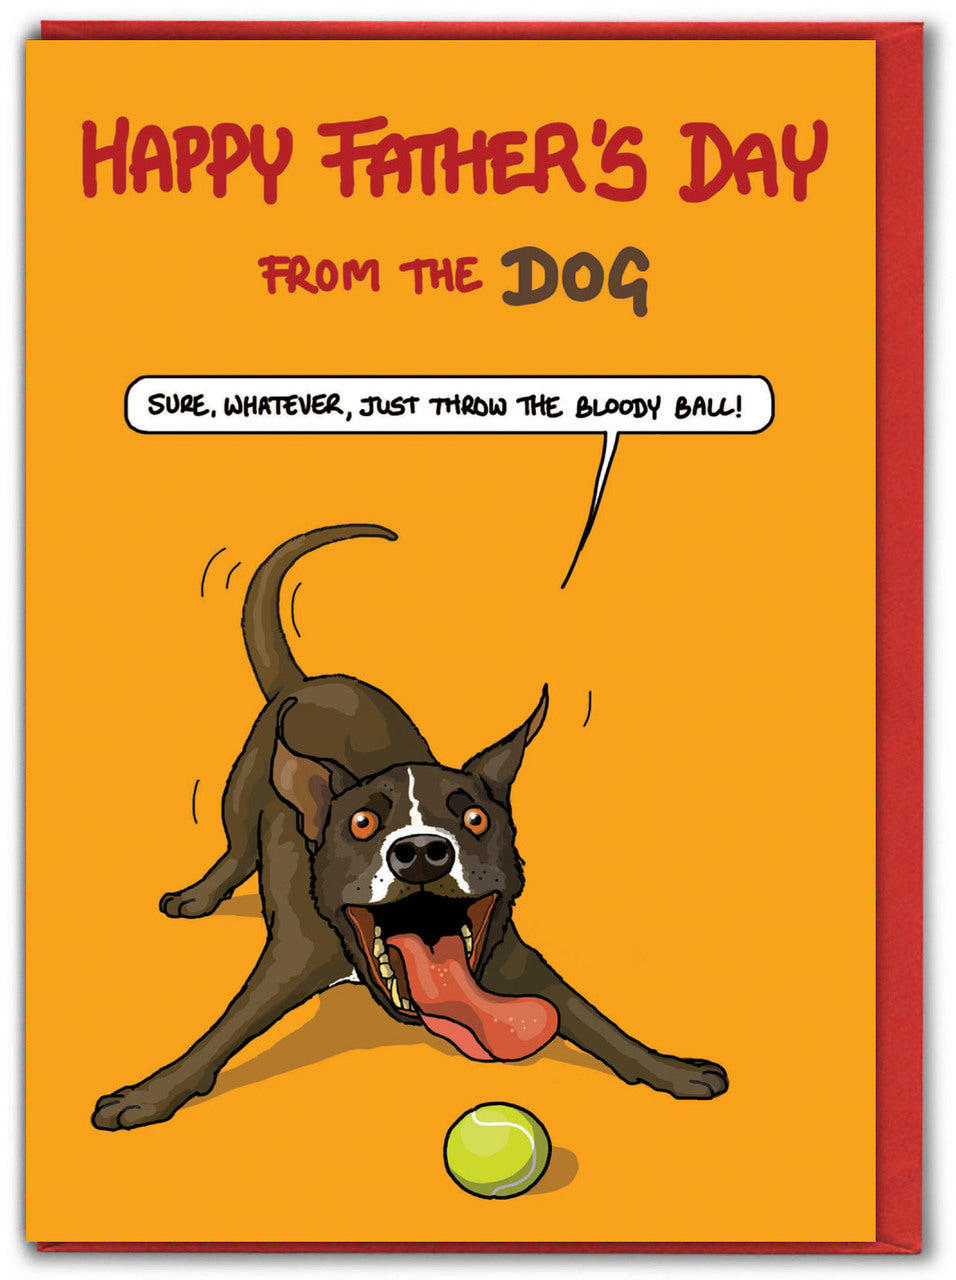 Happy Father's Day from the dog